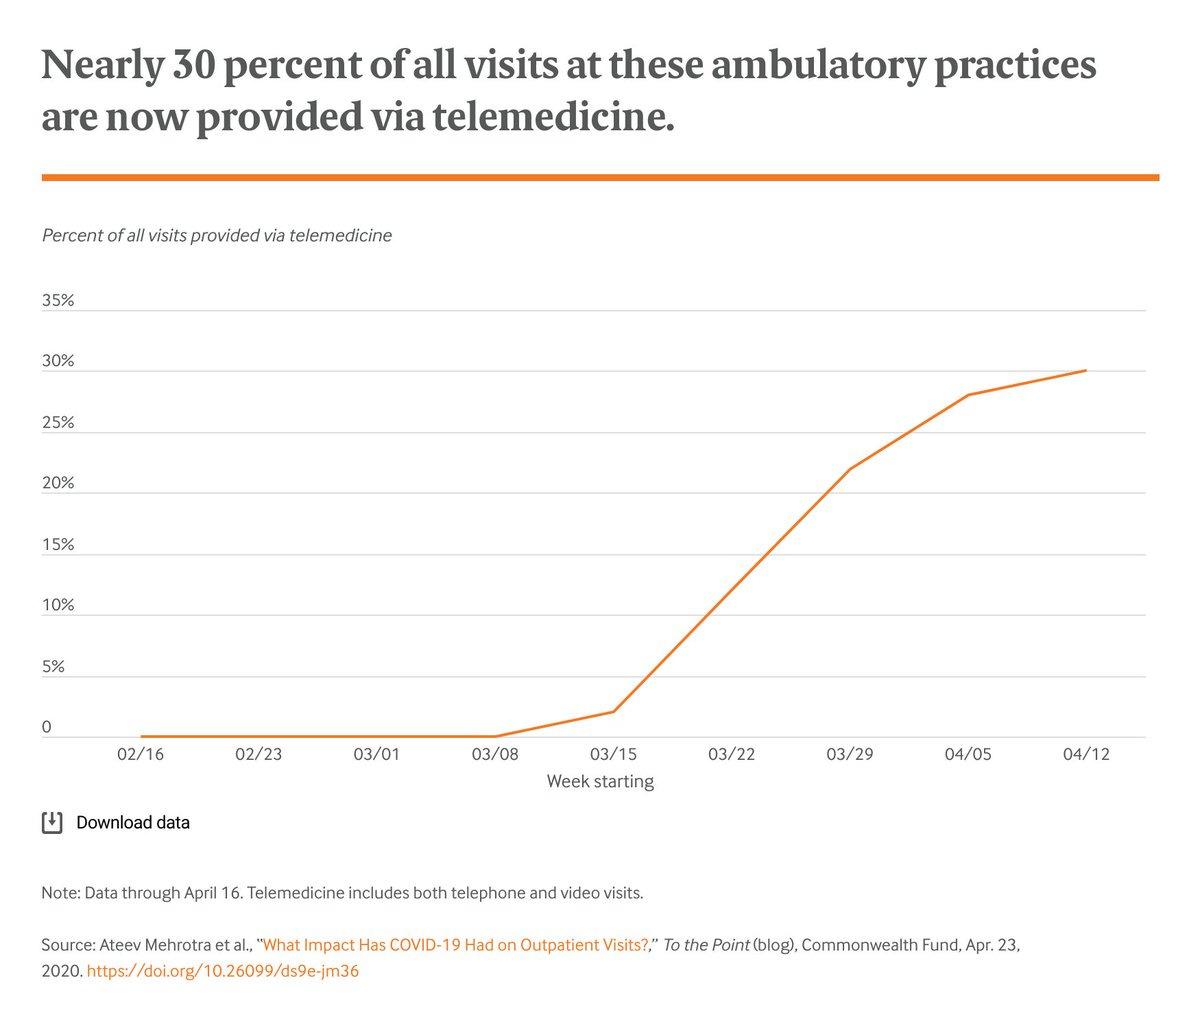 To increase access Medicare and private payers quickly expanded telemedicine reimbursement. Providers have responded. A dramatic increase in telemedicine visits which now account for ~30% of all visits. 5/